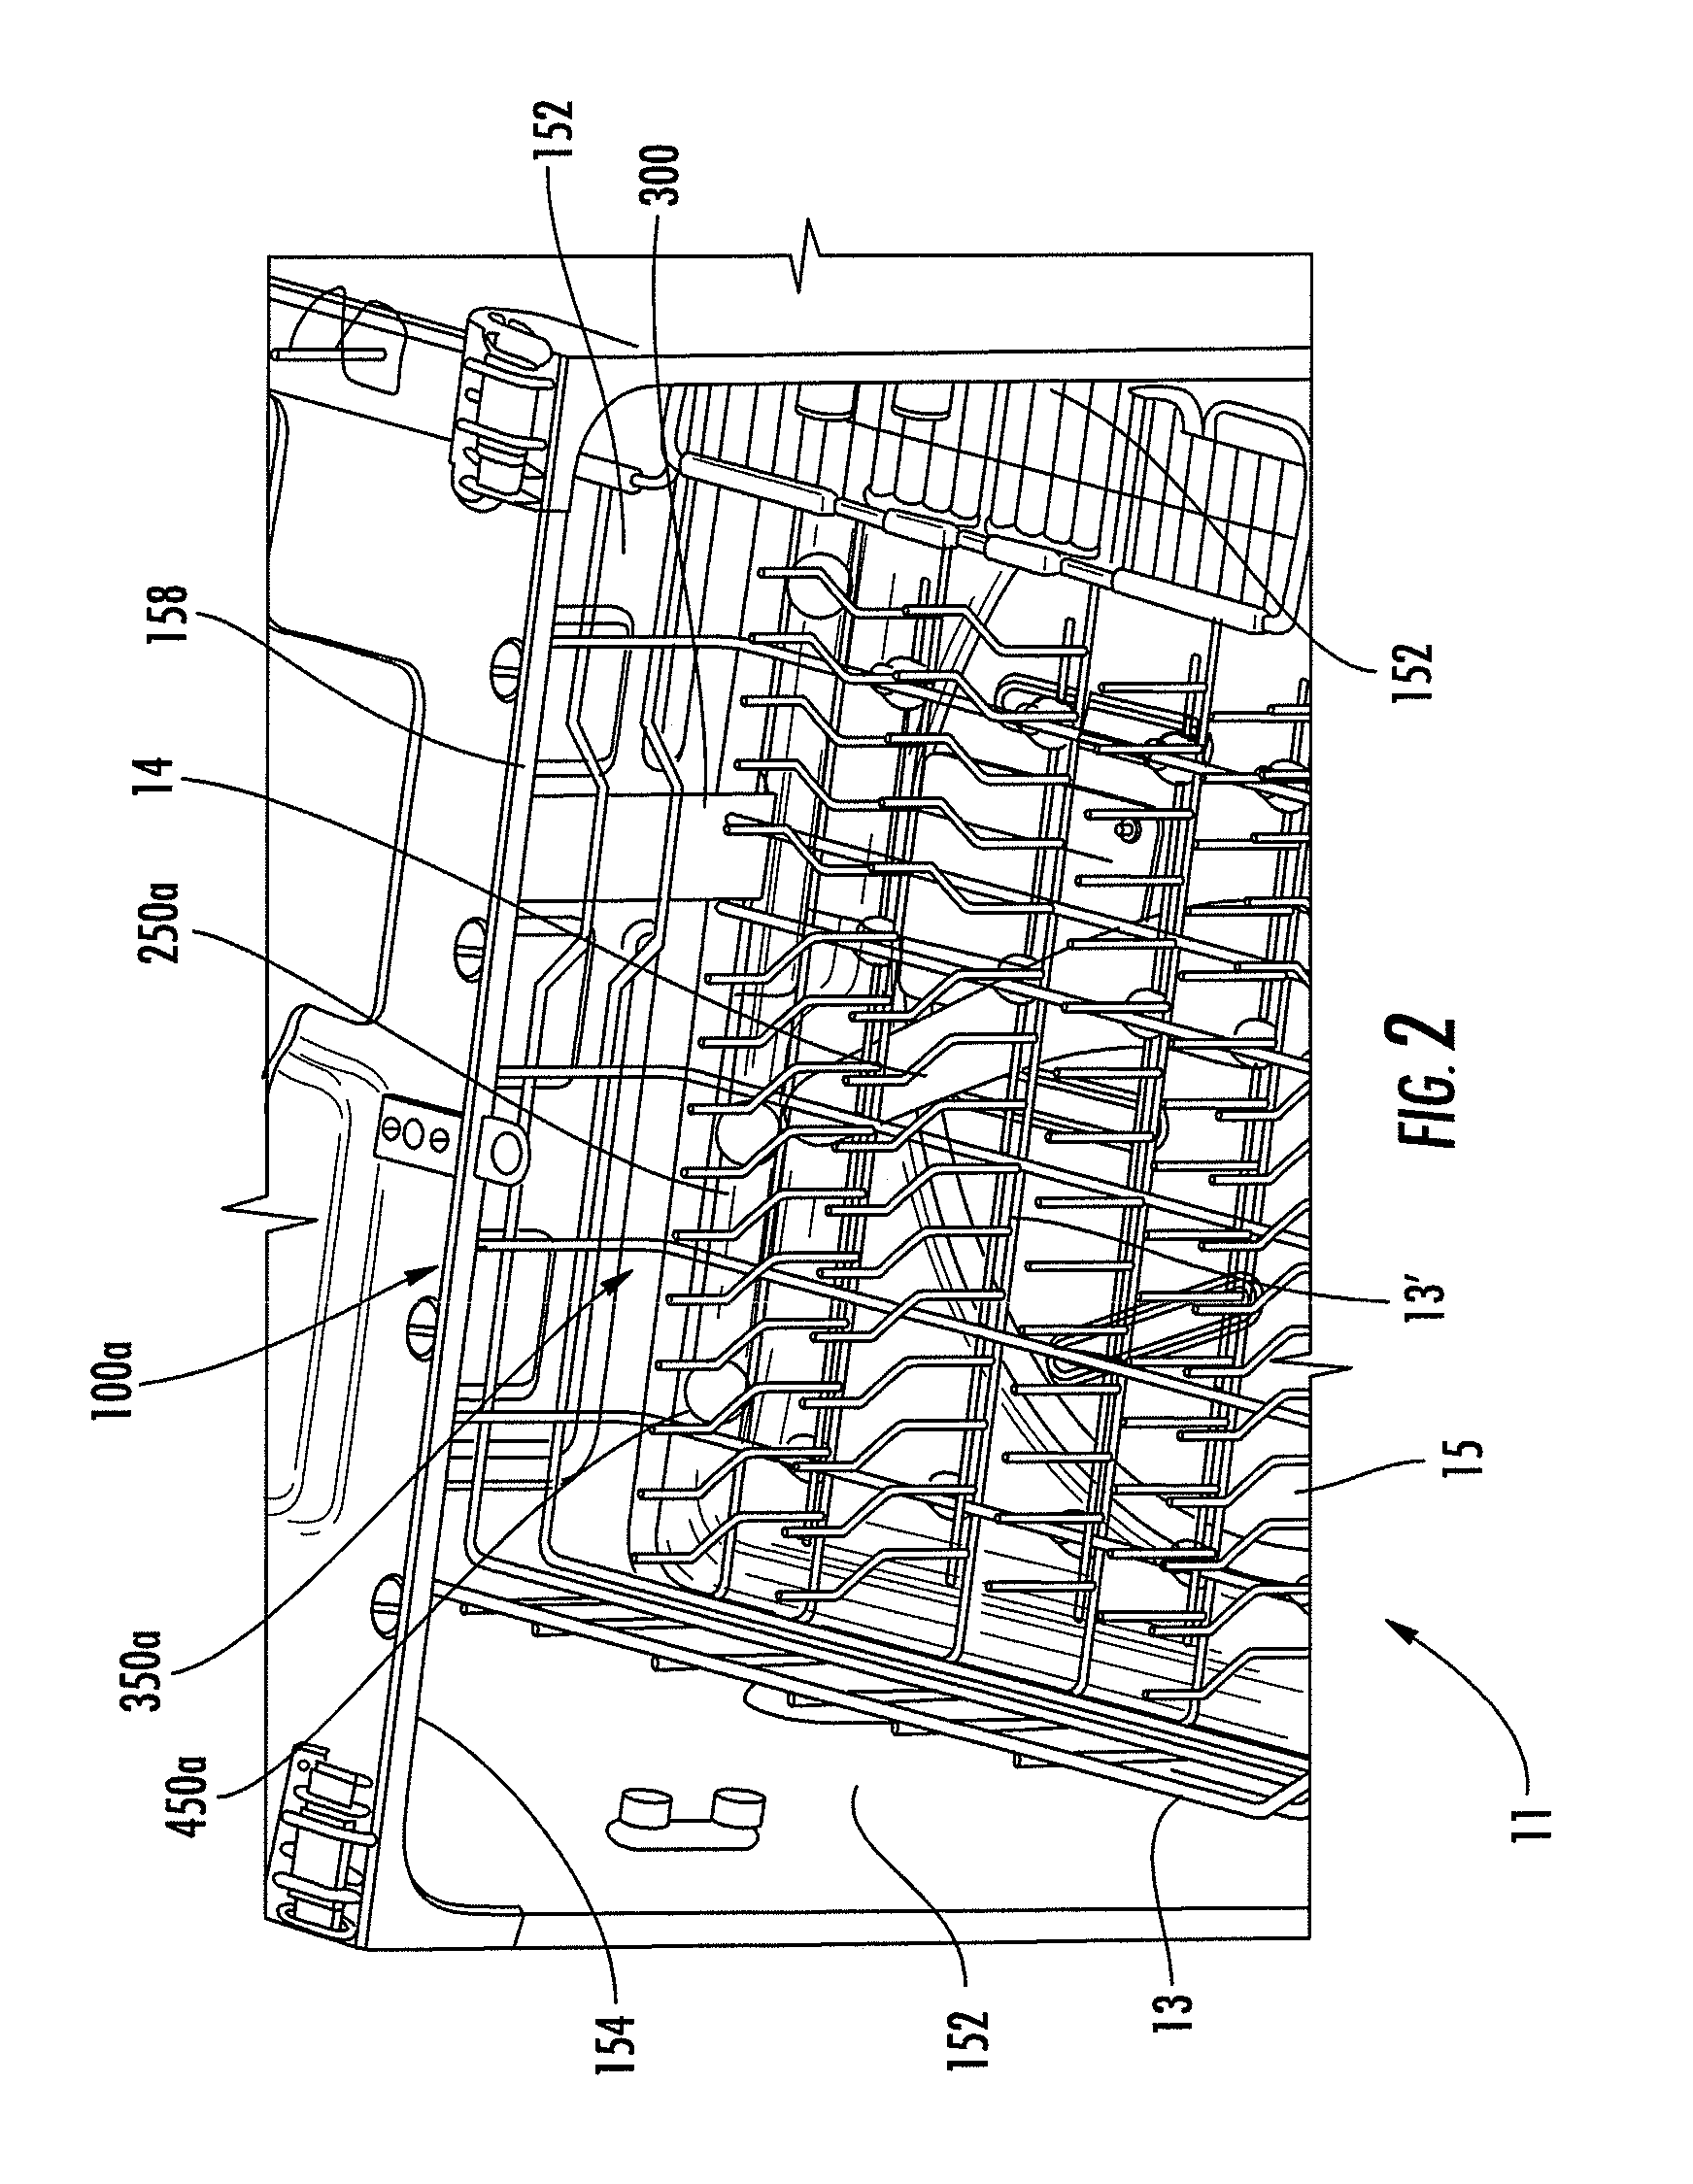 Fluid circulation arrangement for providing an intensified wash effect in a dishwasher and an associated method